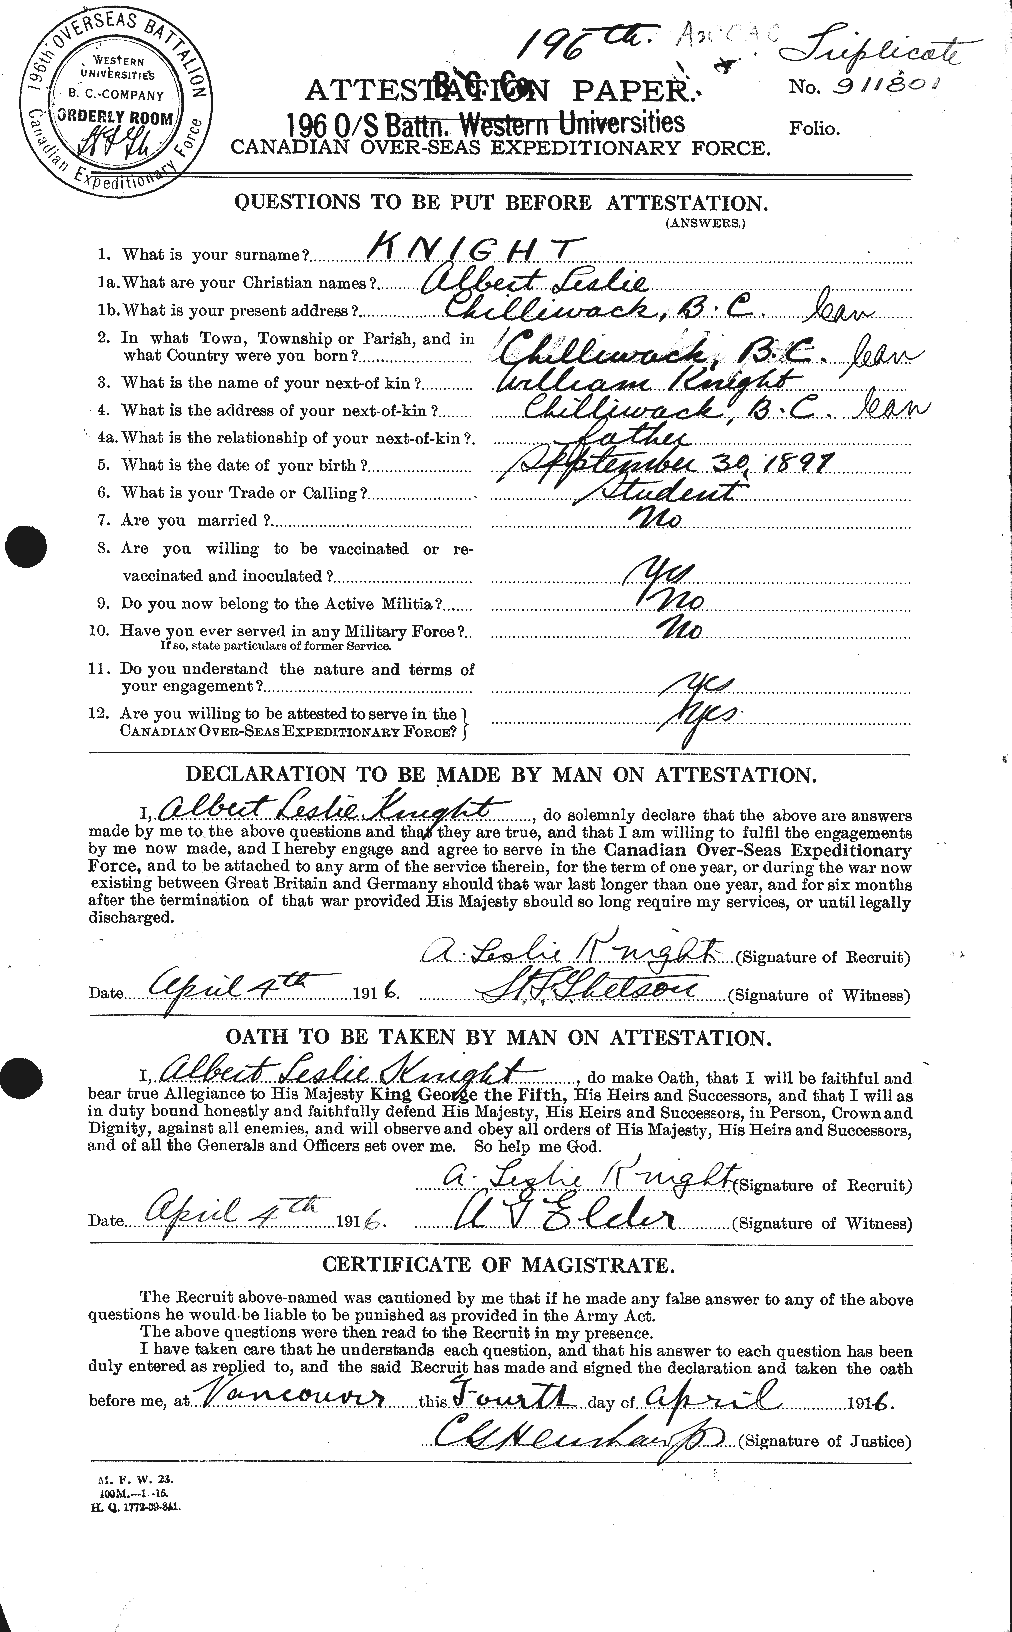 Personnel Records of the First World War - CEF 438092a